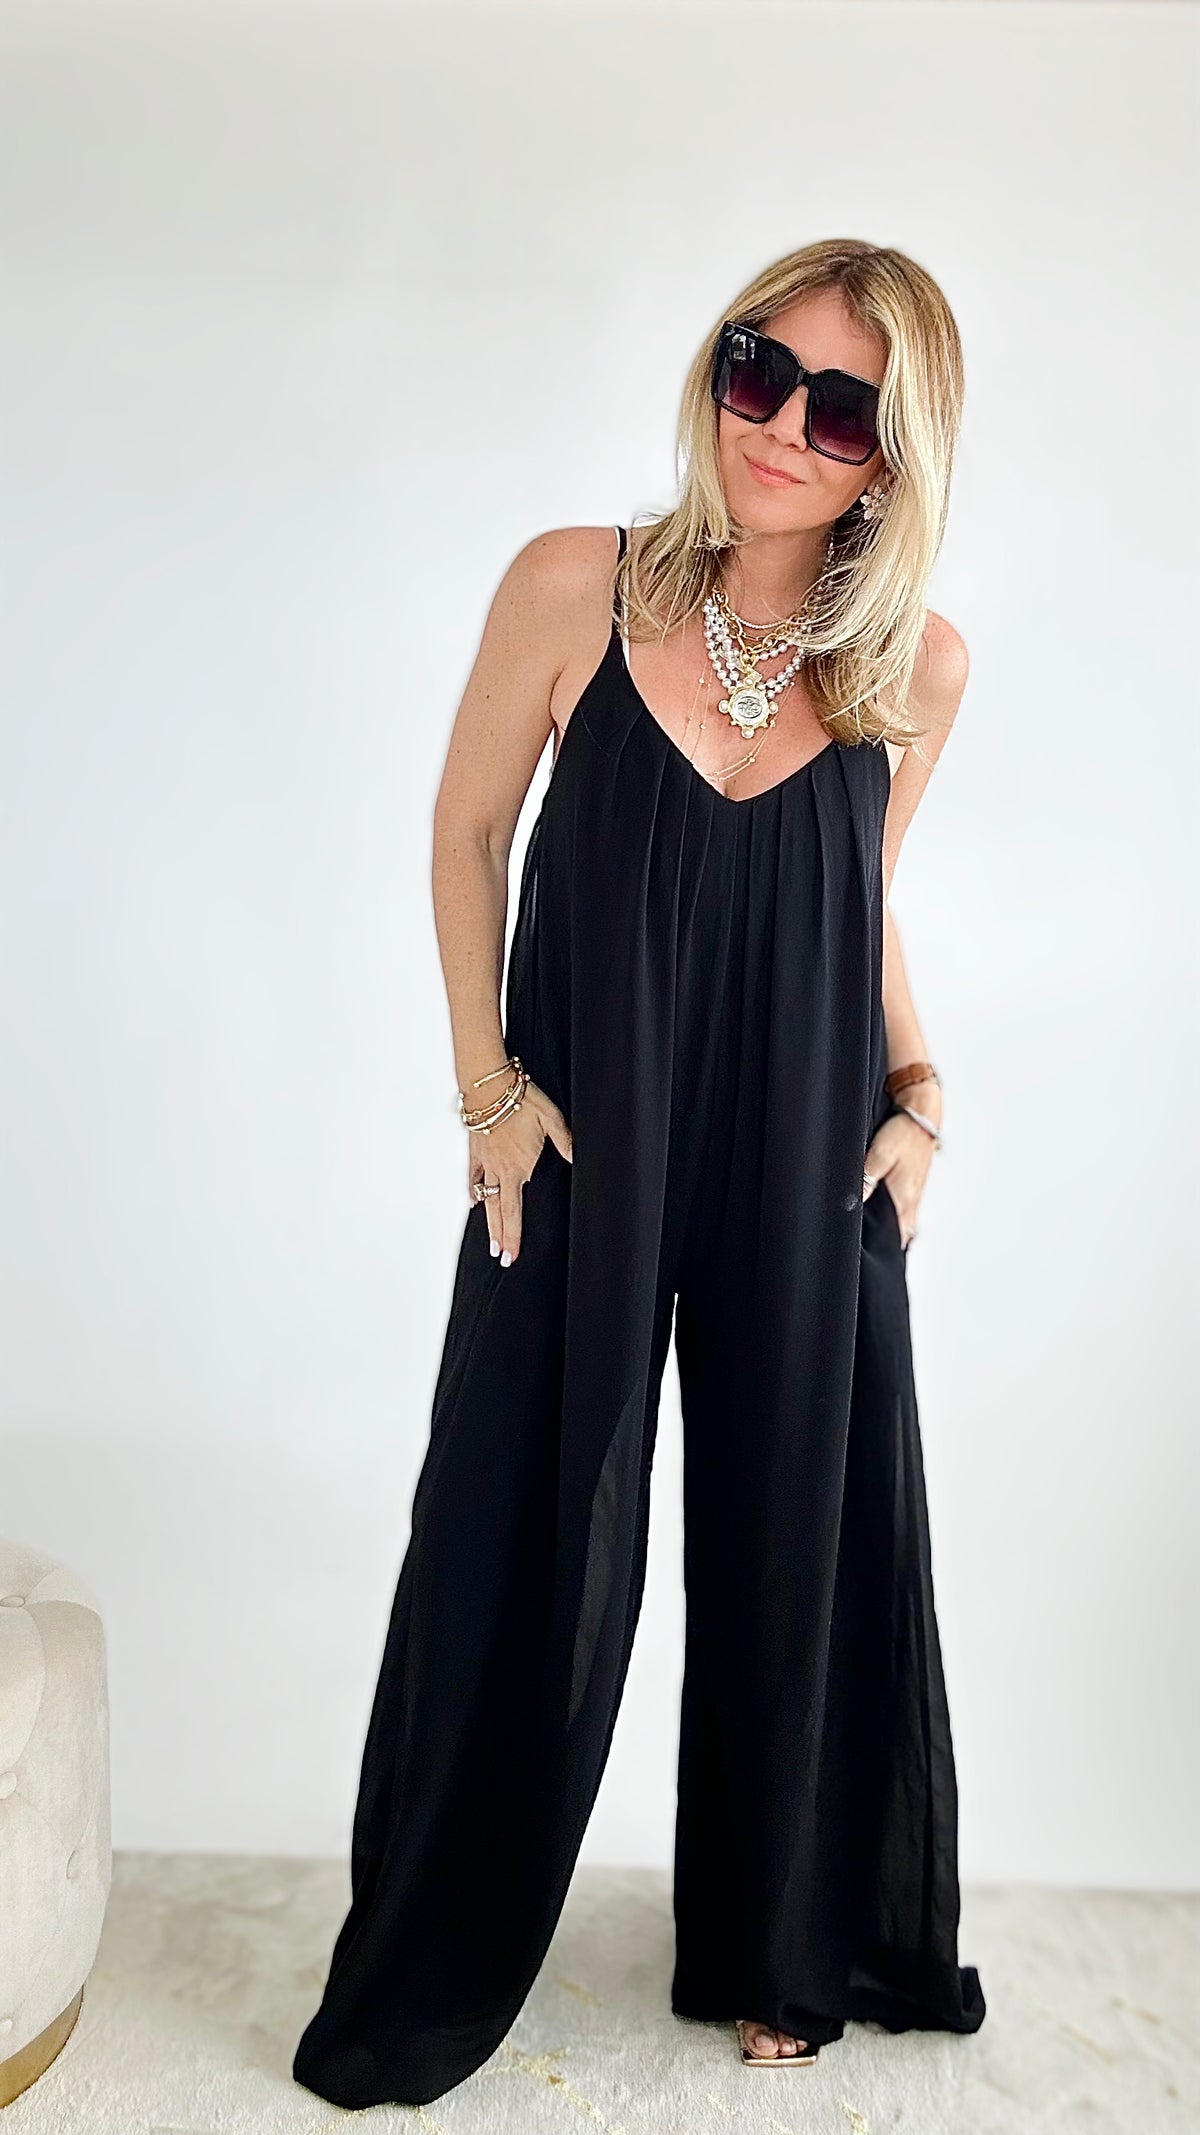 Brisbane Woven Jumpsuit - Black-200 Dresses/Jumpsuits/Rompers-DRESS DAY-Coastal Bloom Boutique, find the trendiest versions of the popular styles and looks Located in Indialantic, FL